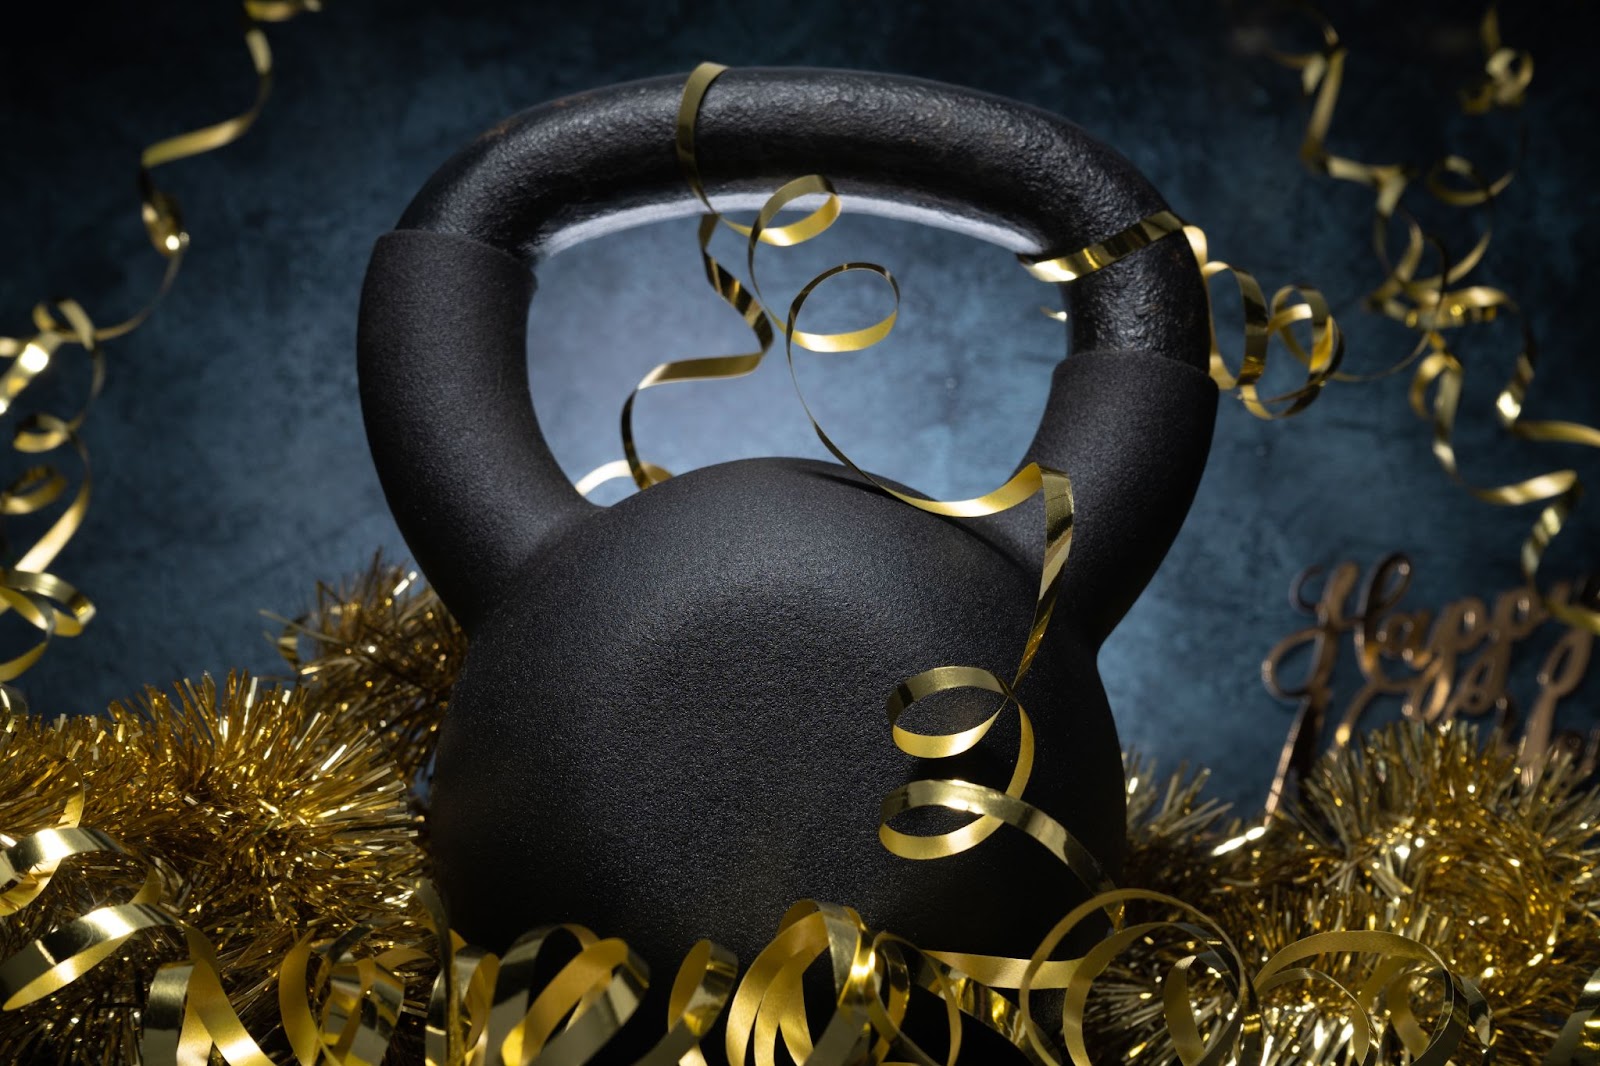 Image of a kettlebell surrounded by gold confetti